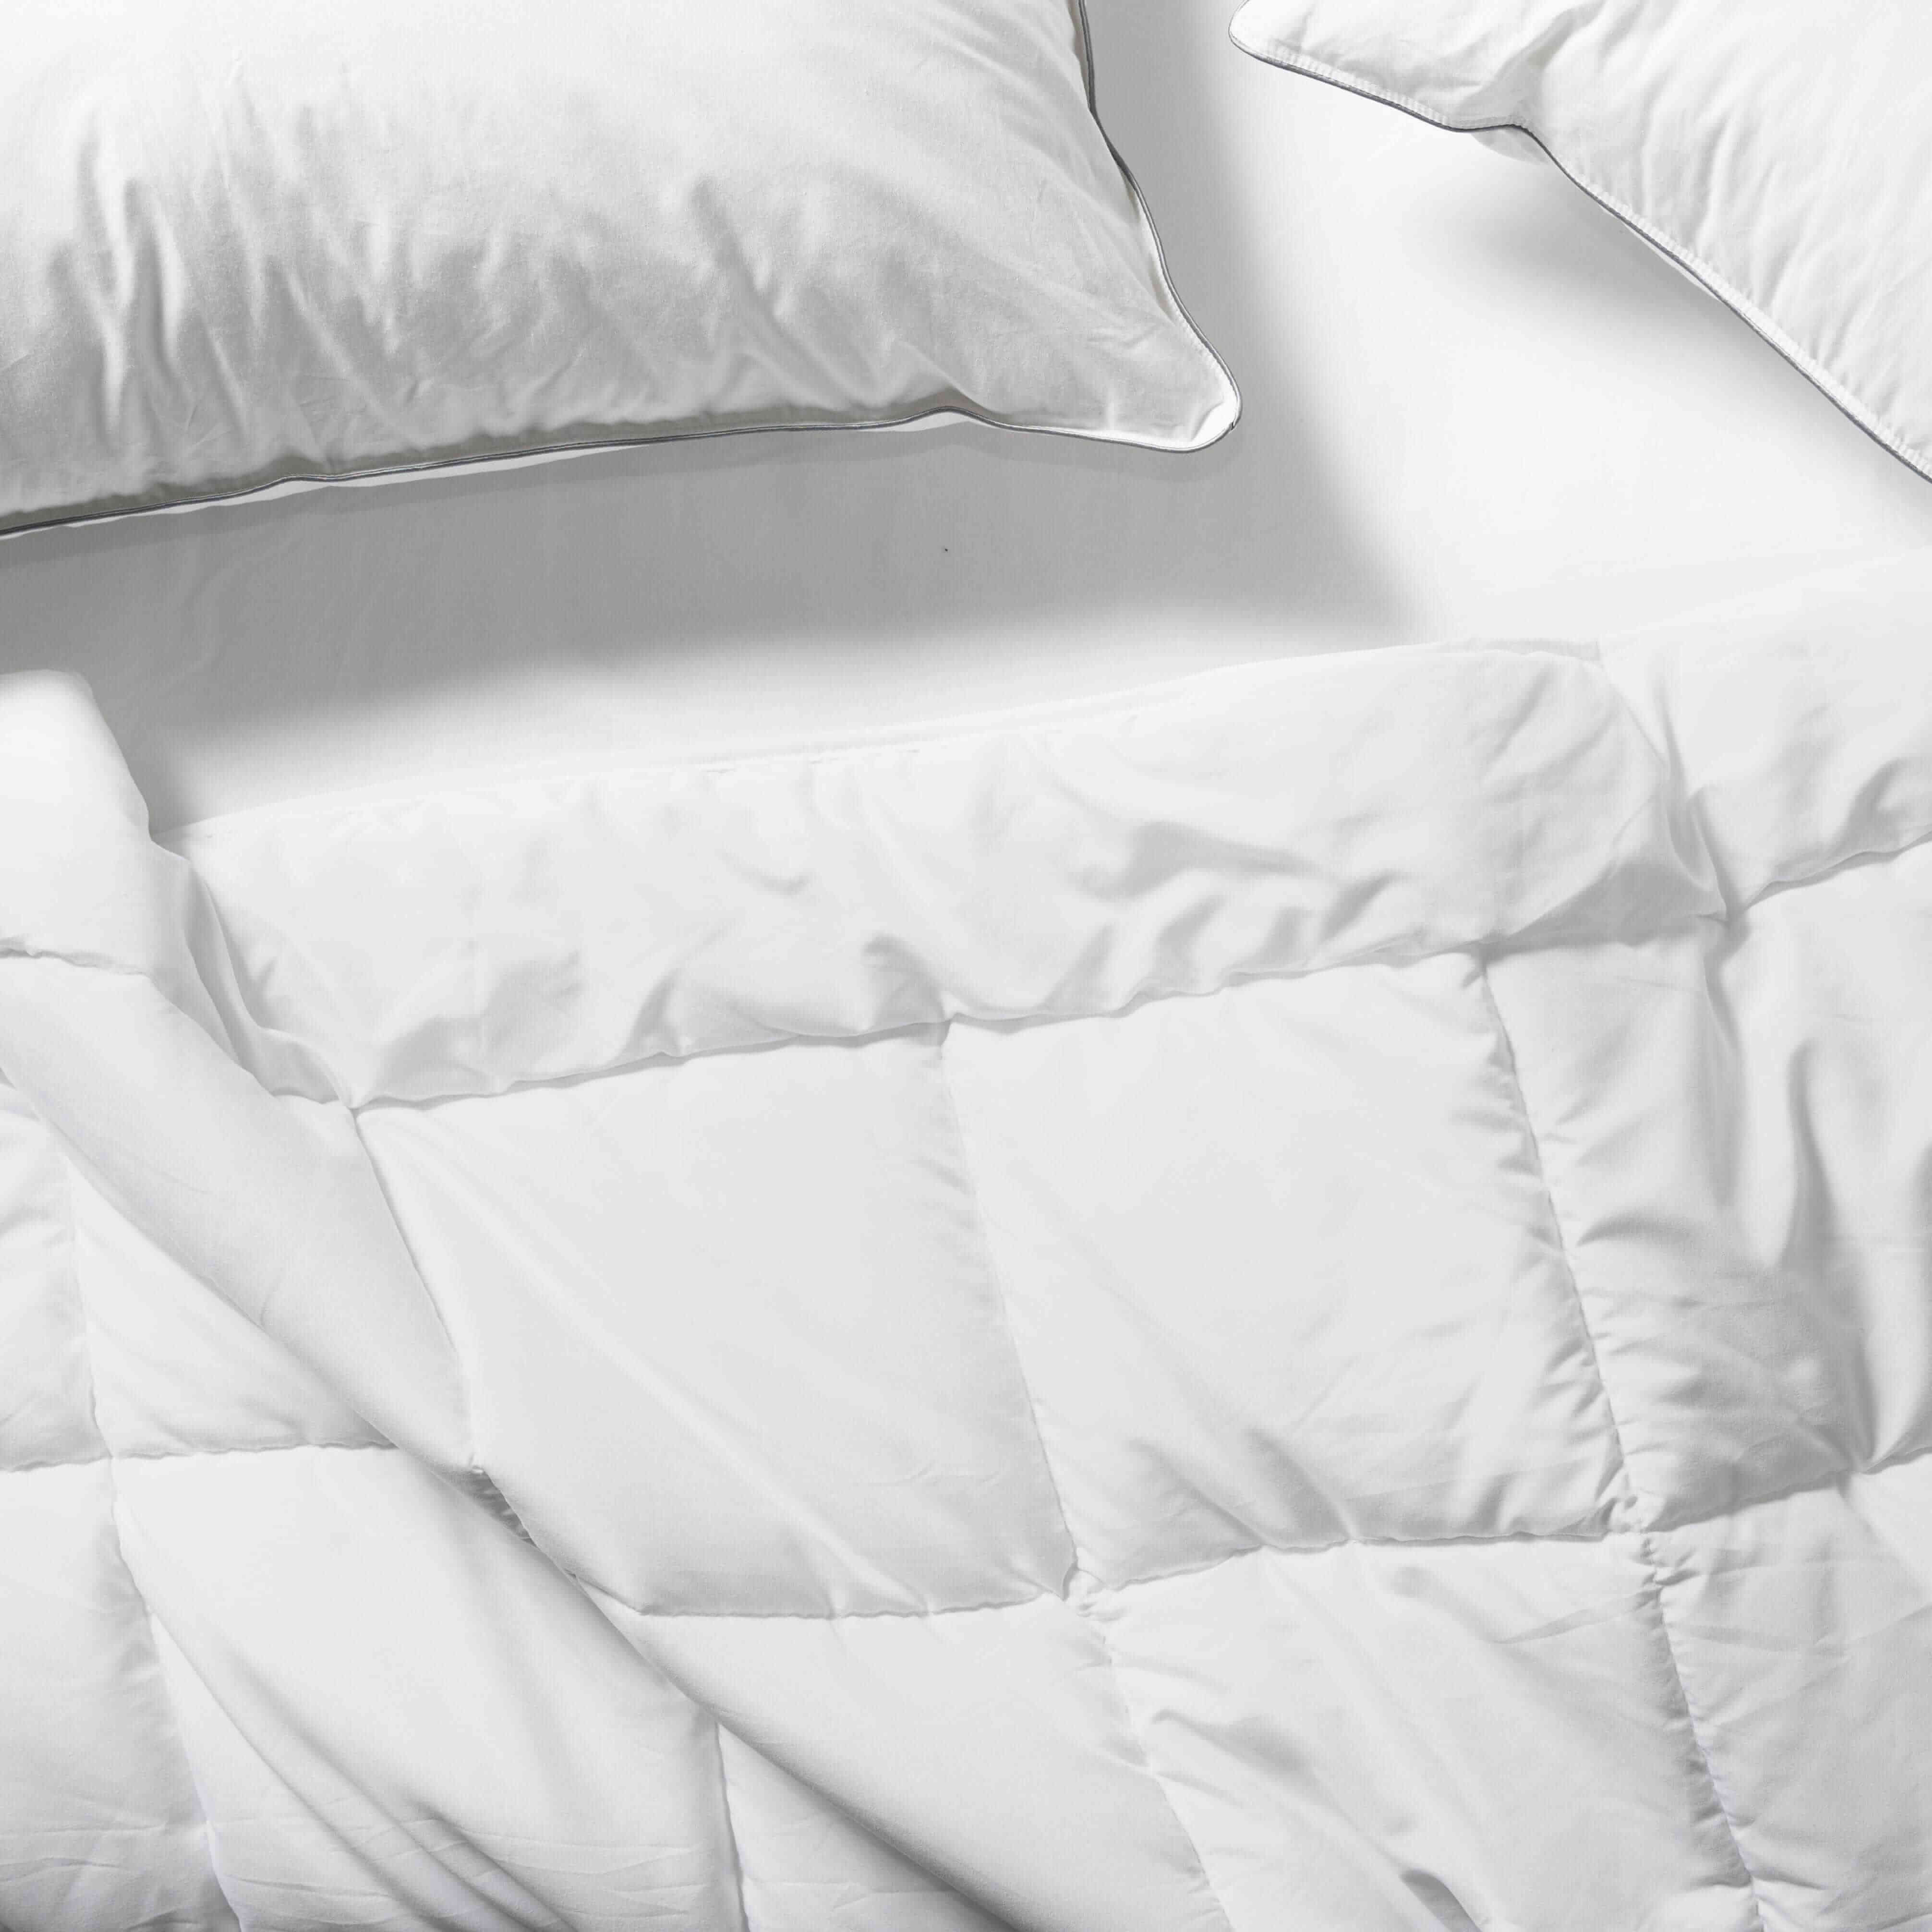 Flay lay of Down Alternative Duvet Blanket with Essential Pillows